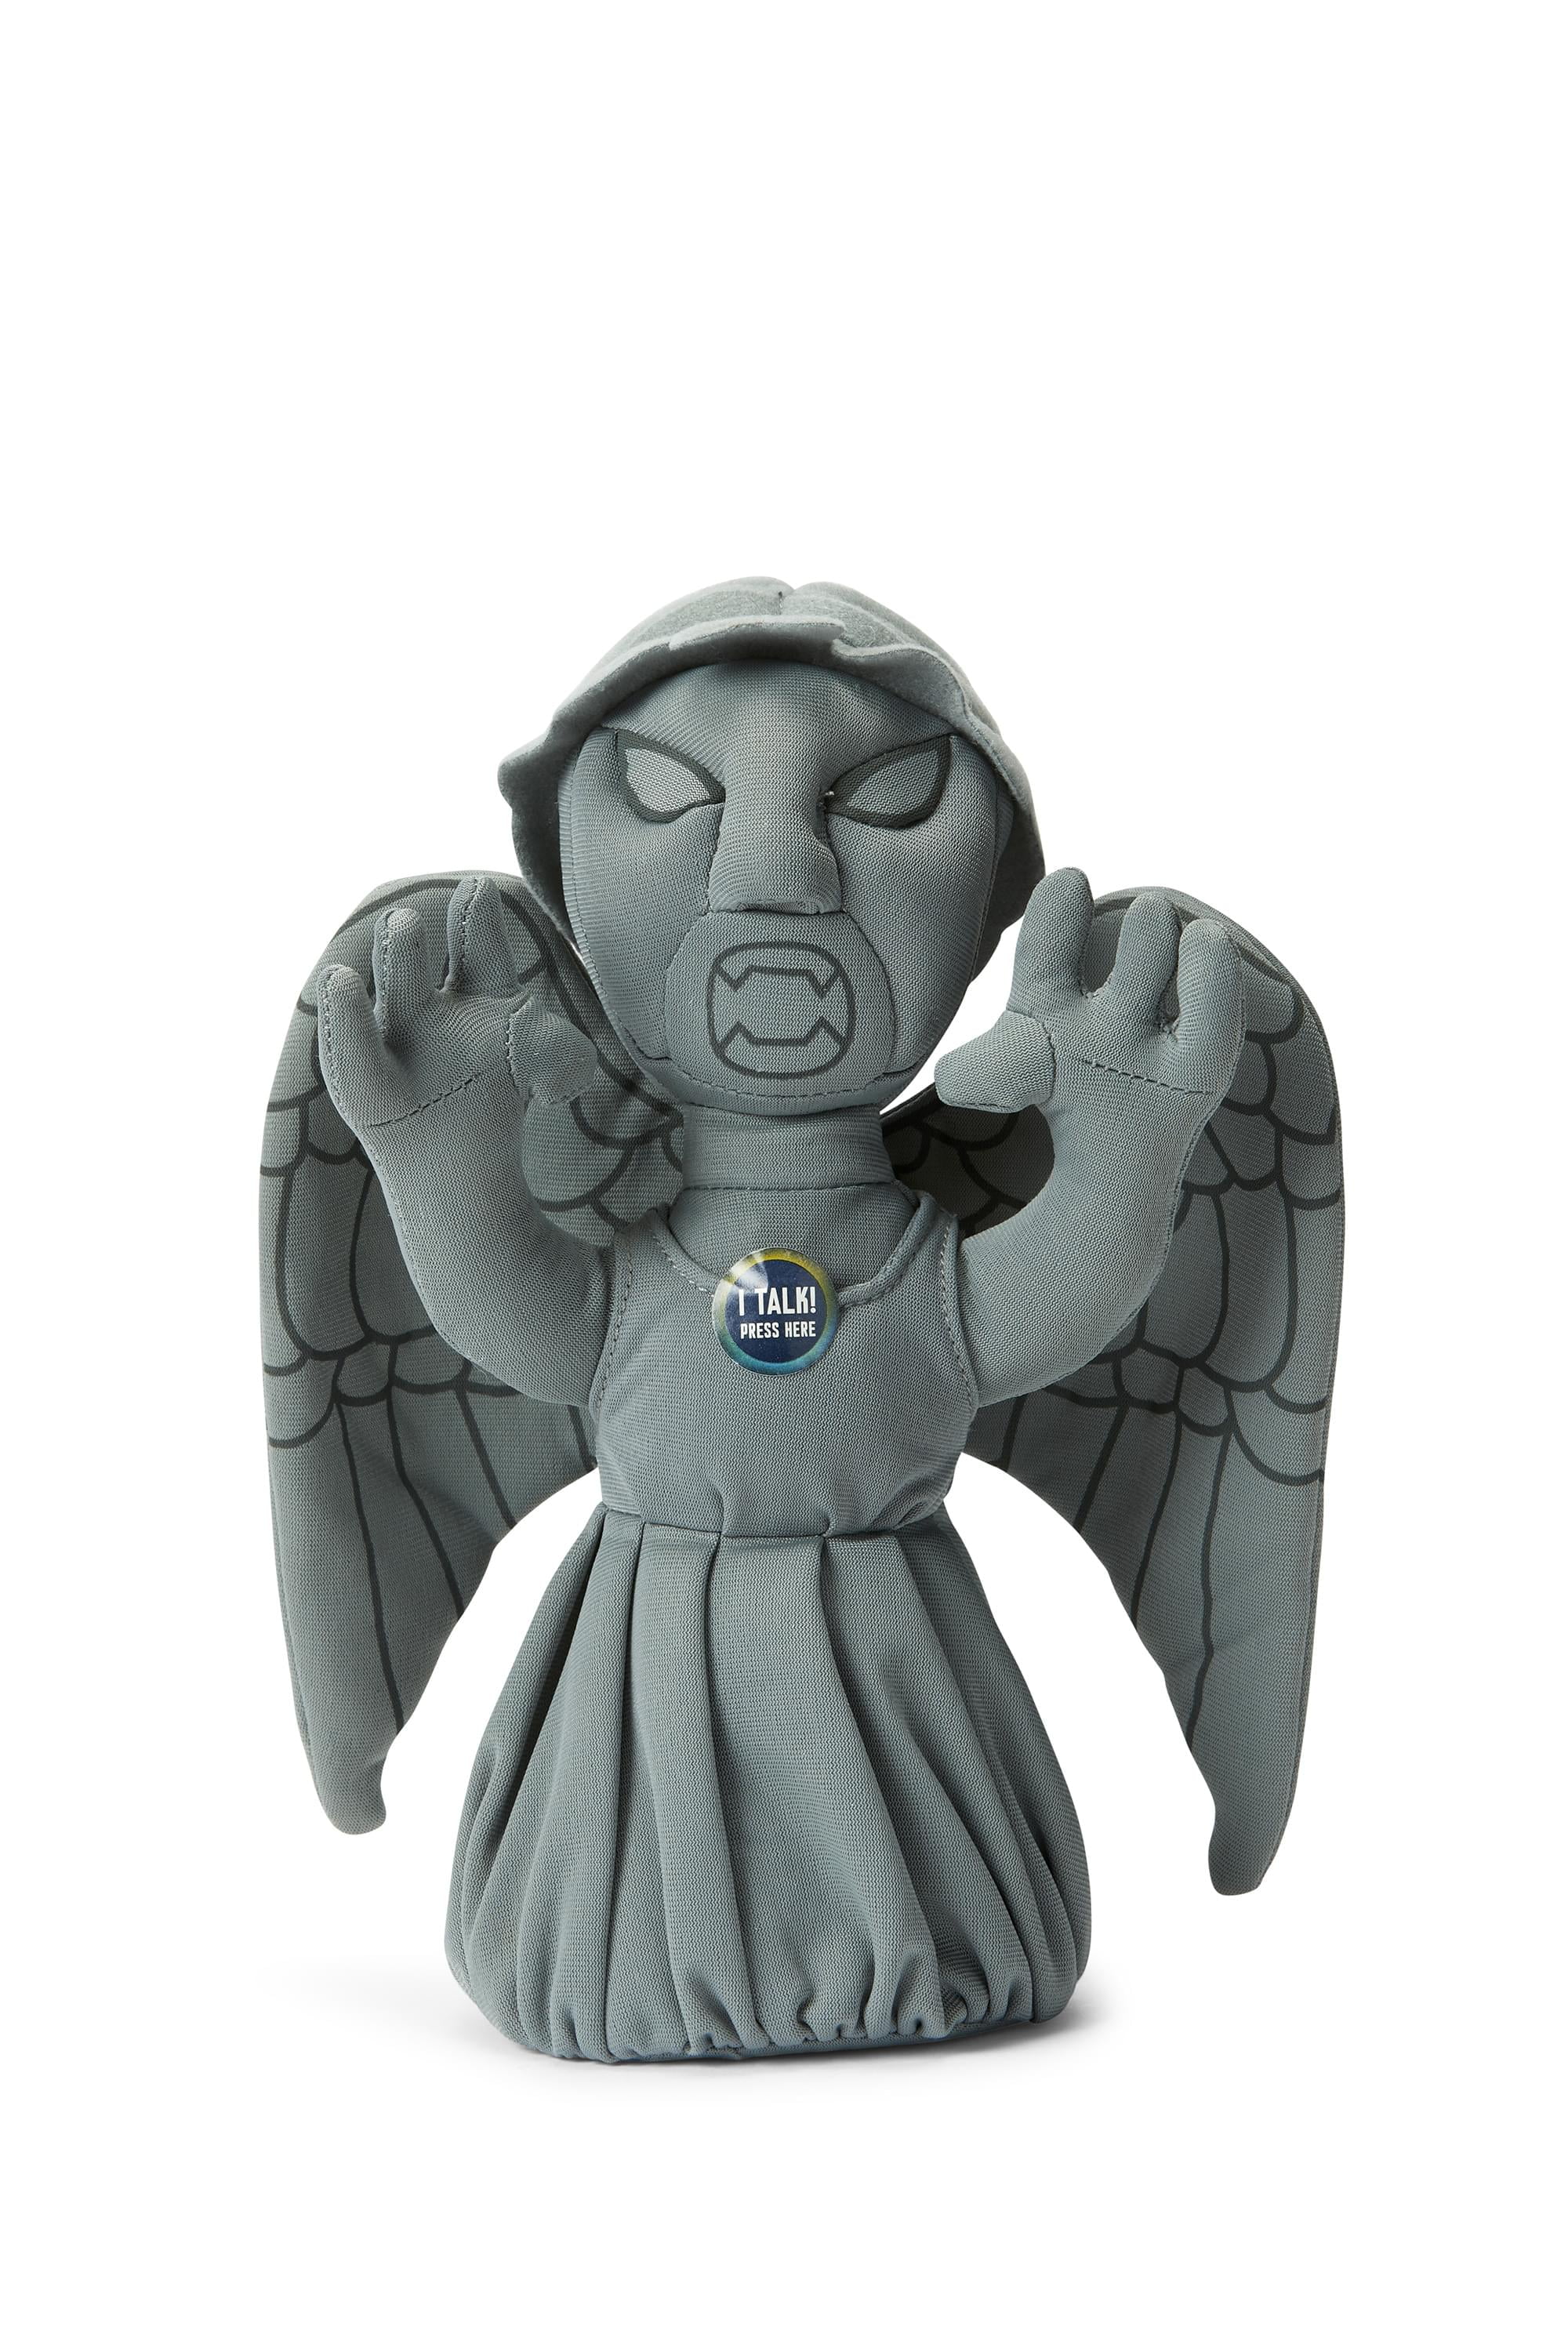 Dr Who Weeping Angel Talking Plush Keyring Toy Doctor Who 